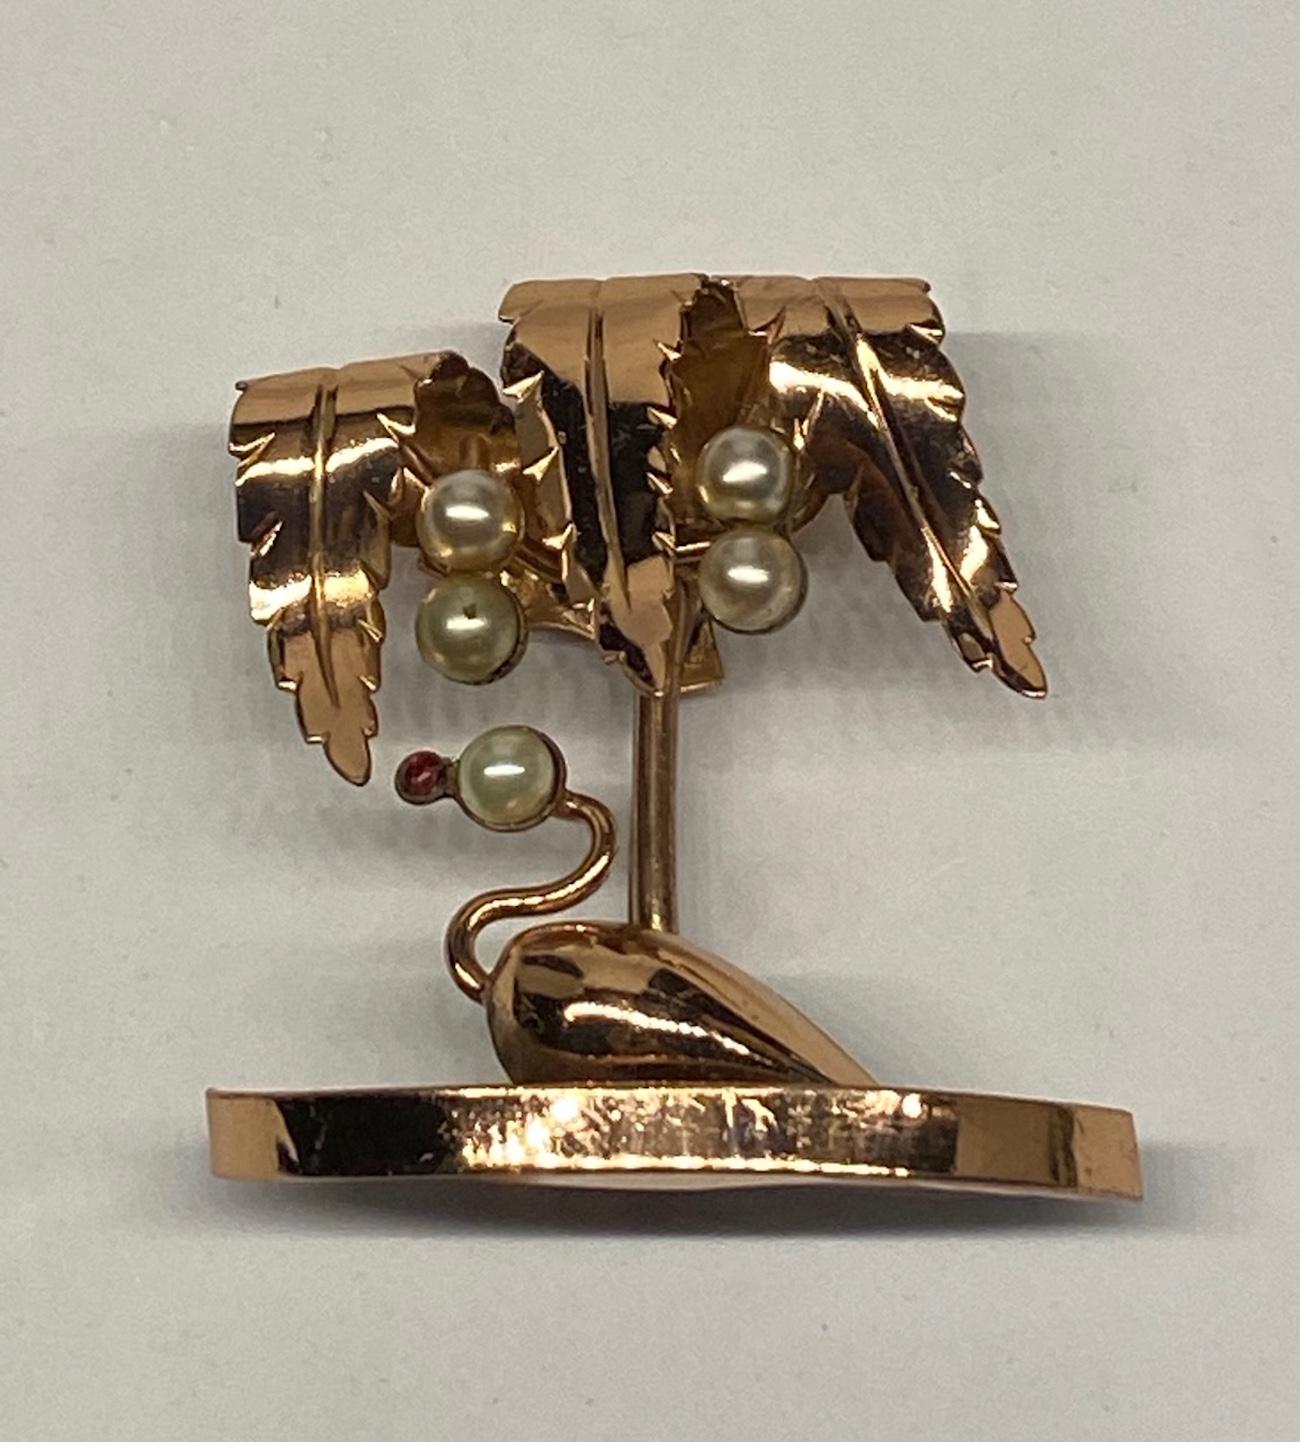 A charming Art Deco 1930 to 1940s three dimension figural brooch of a swan swimming under a palm tree. Hand solder construction, rose gold plate and set with six faux glass pearls. The beak of the swan is a small red rhinestone. Attributed to the